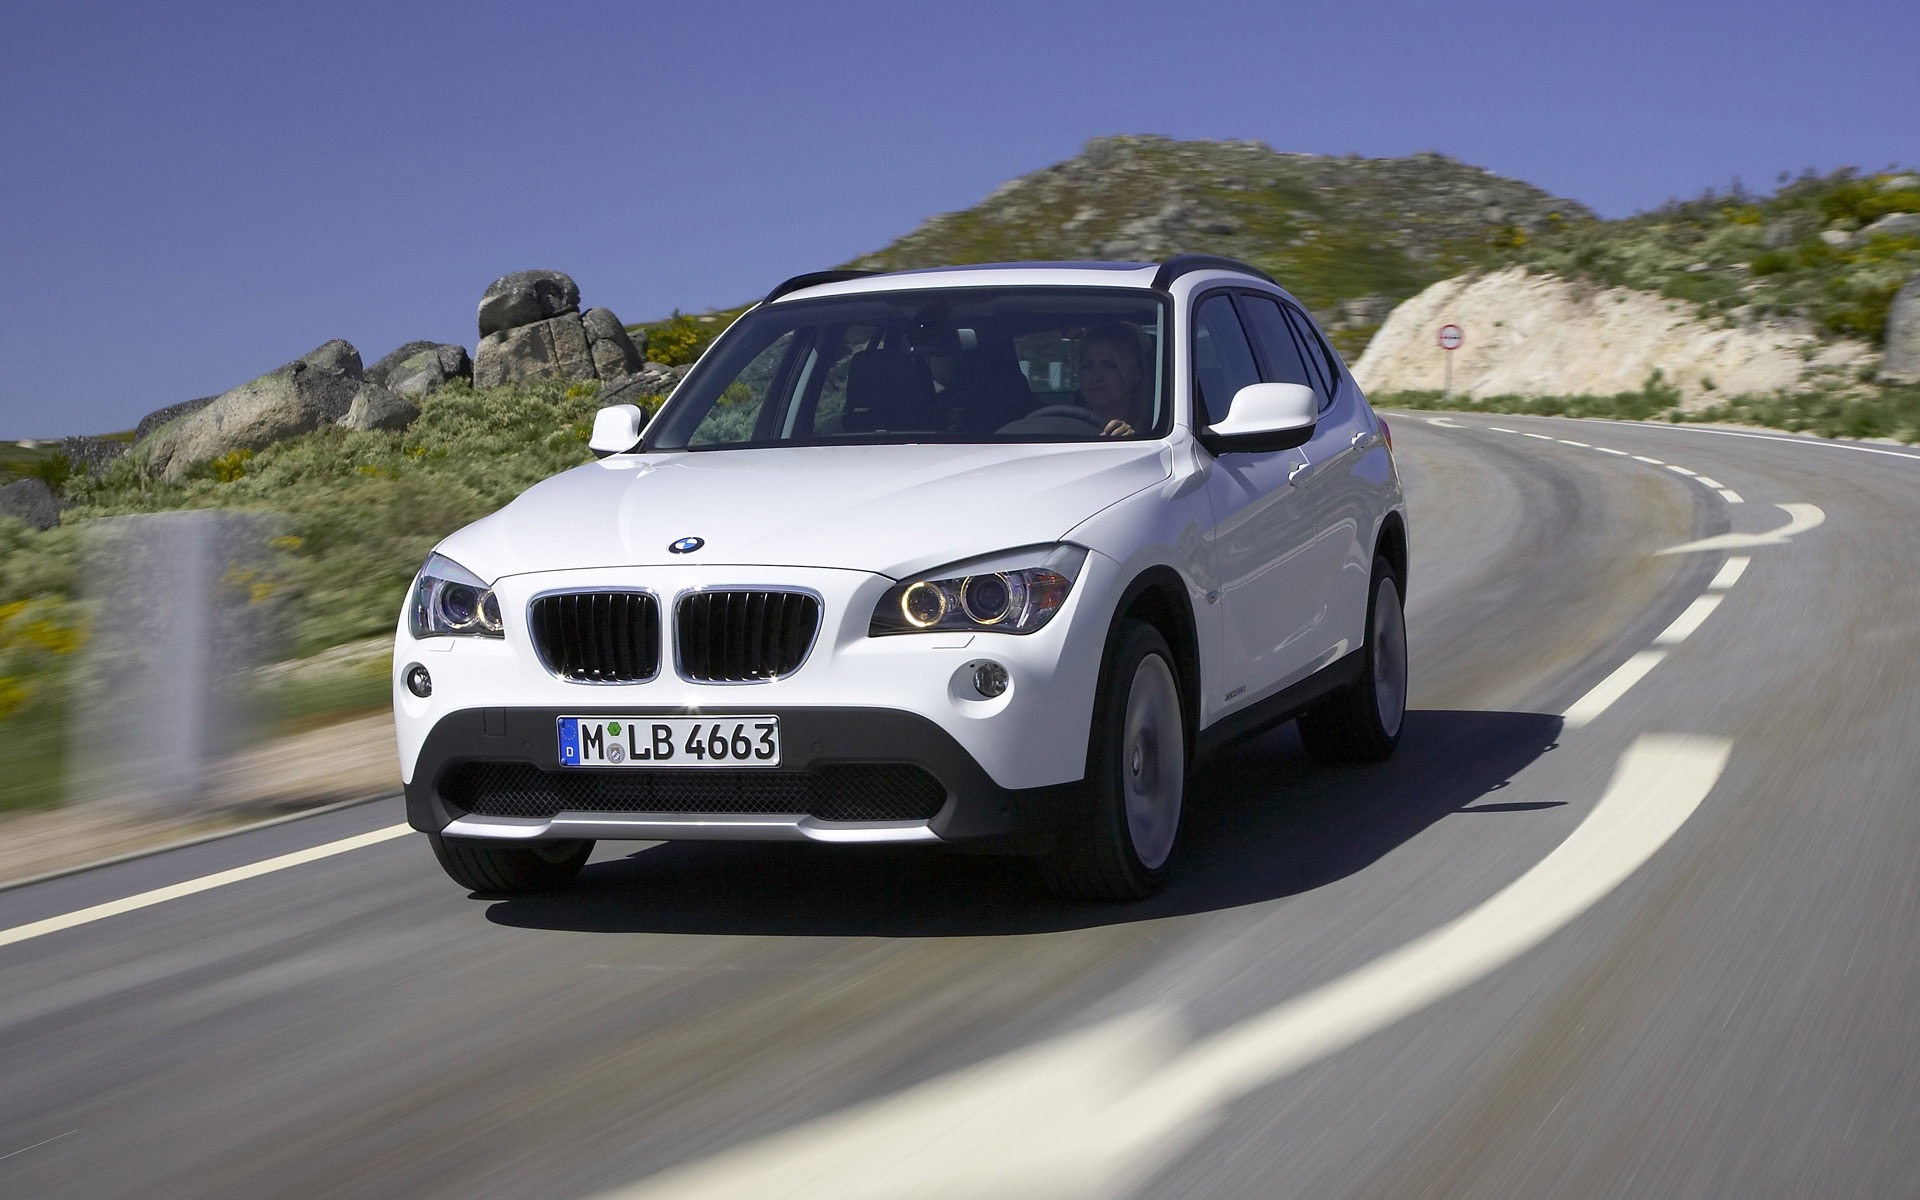 Bmw X1 Wallpaper Cars In Jpg Format For